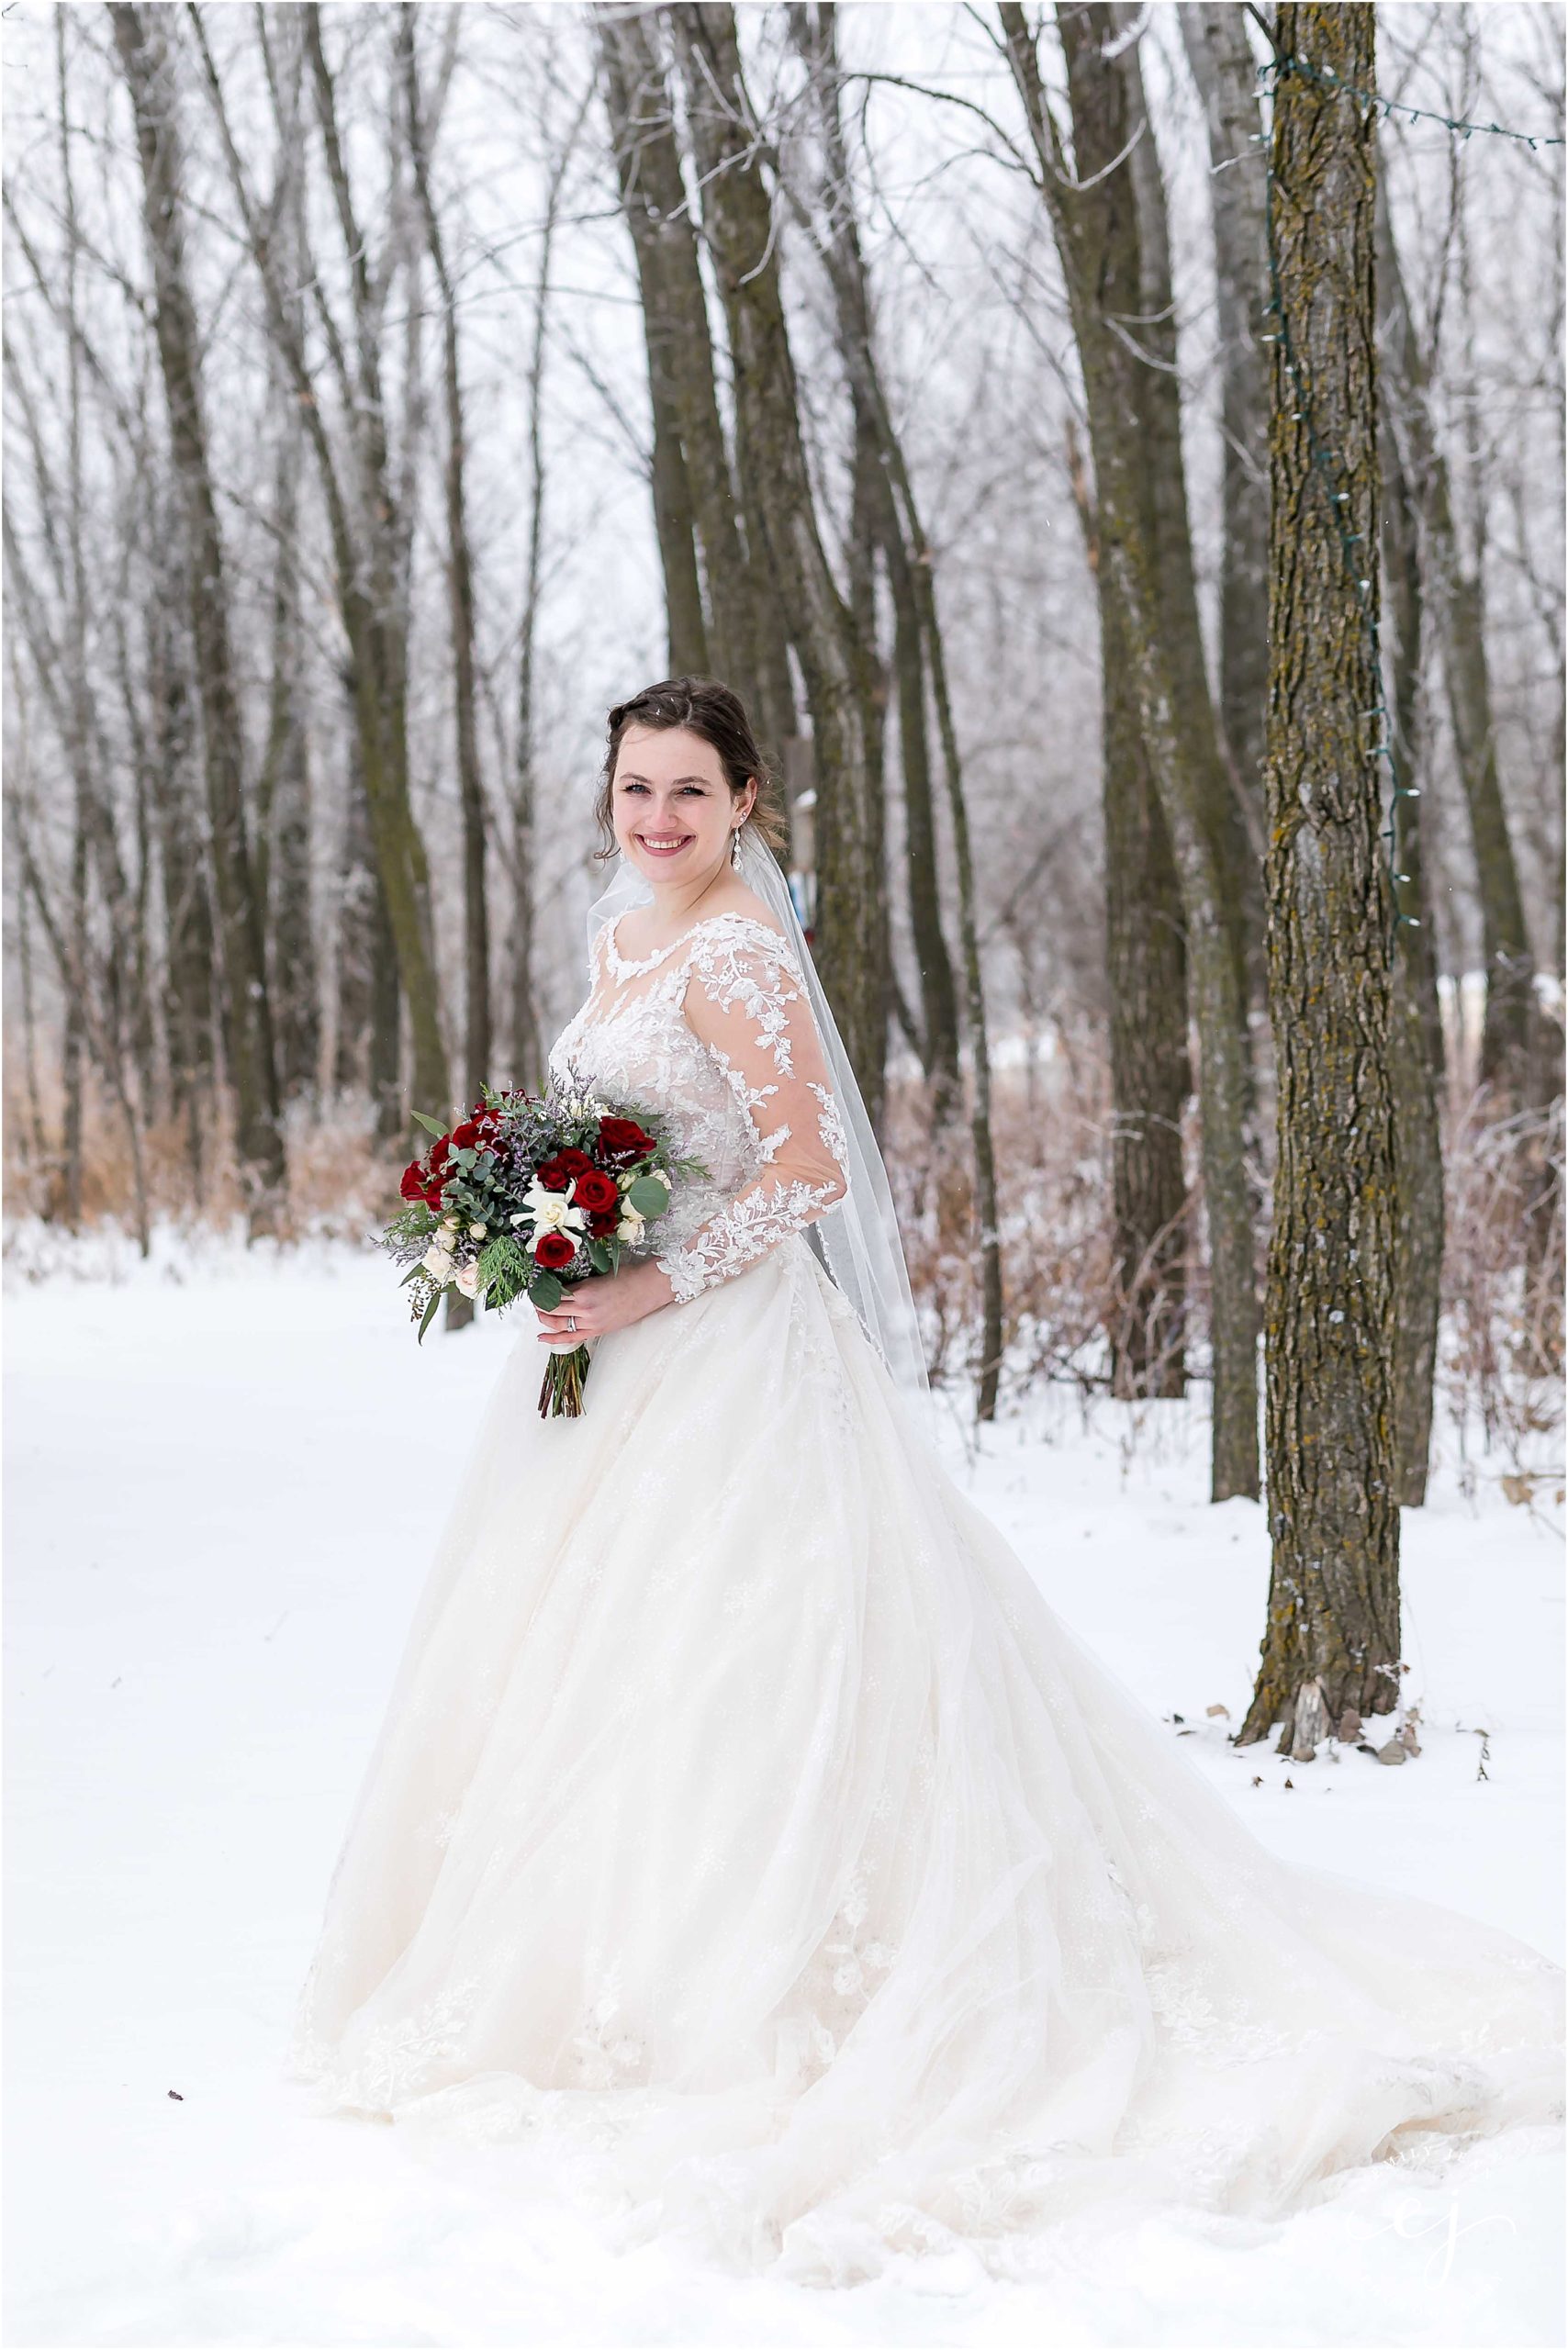 bride standing with red flowers in winter outdoors forest